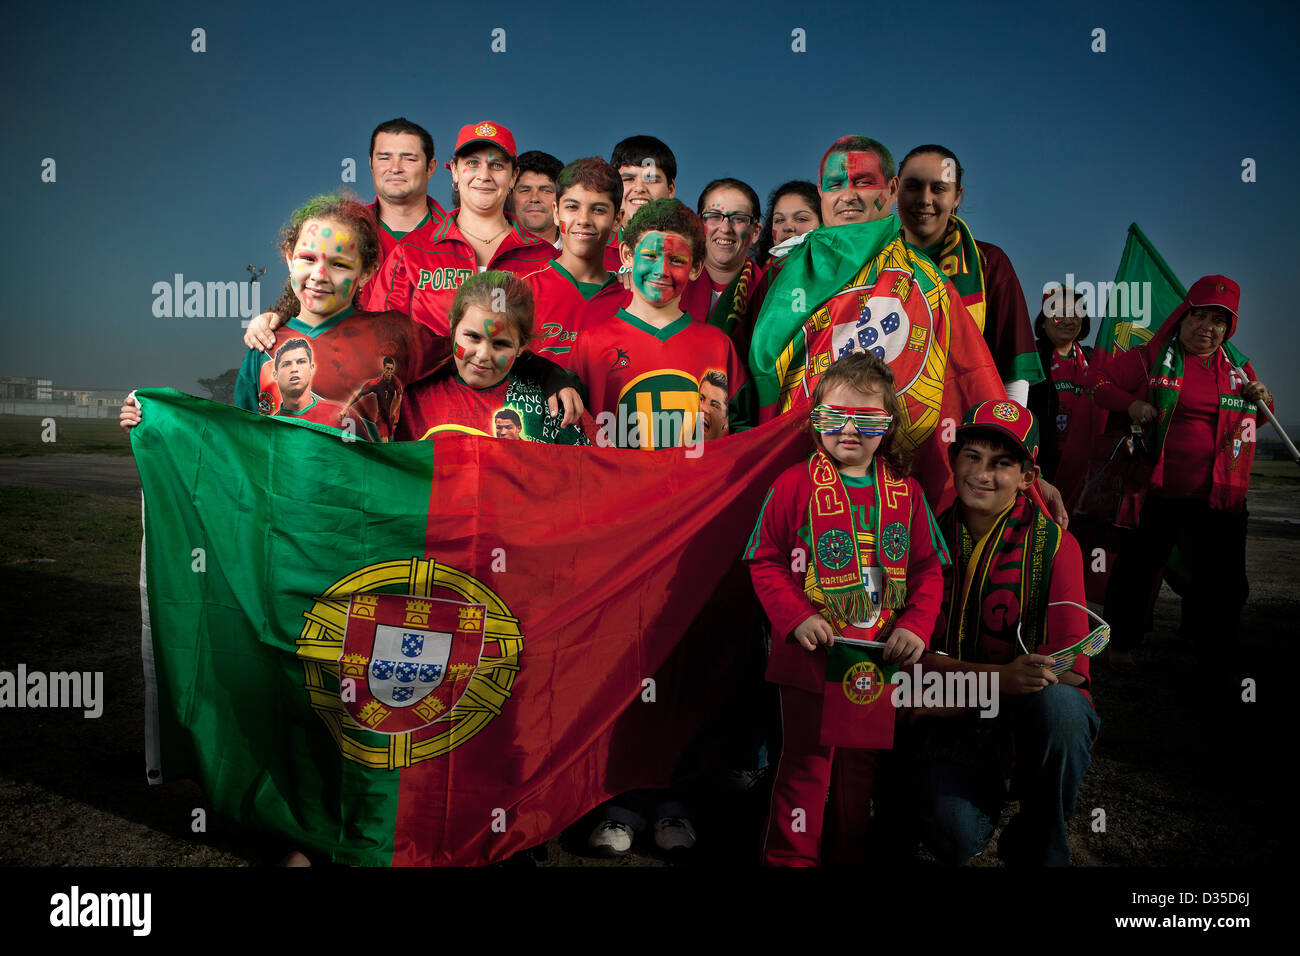 Portuguese fans at the Portuguese club in Milnerton in Cape Town just prior to the Portugal vs Brazil Group G match. Stock Photo